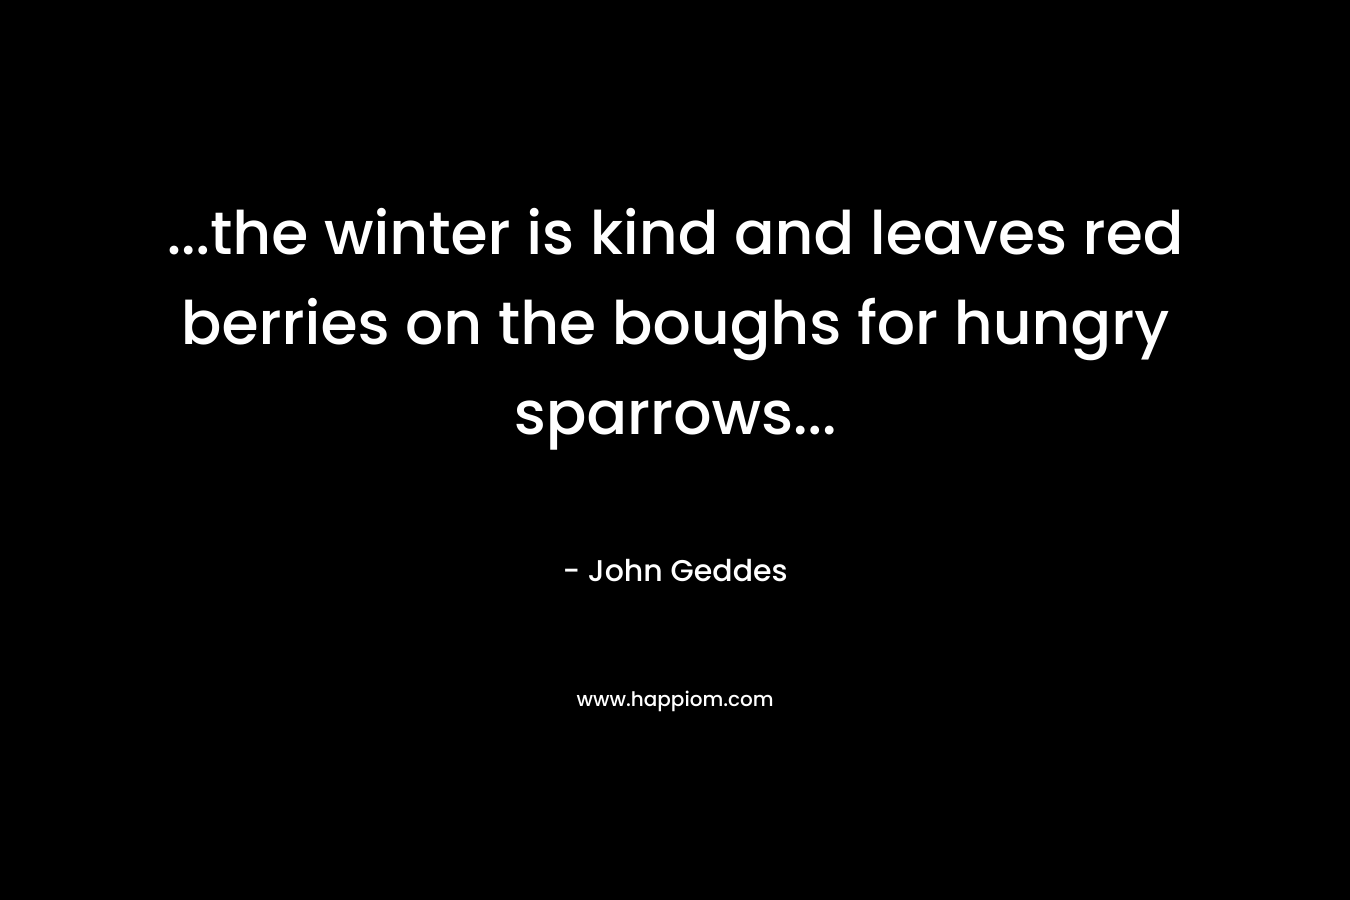 ...the winter is kind and leaves red berries on the boughs for hungry sparrows...